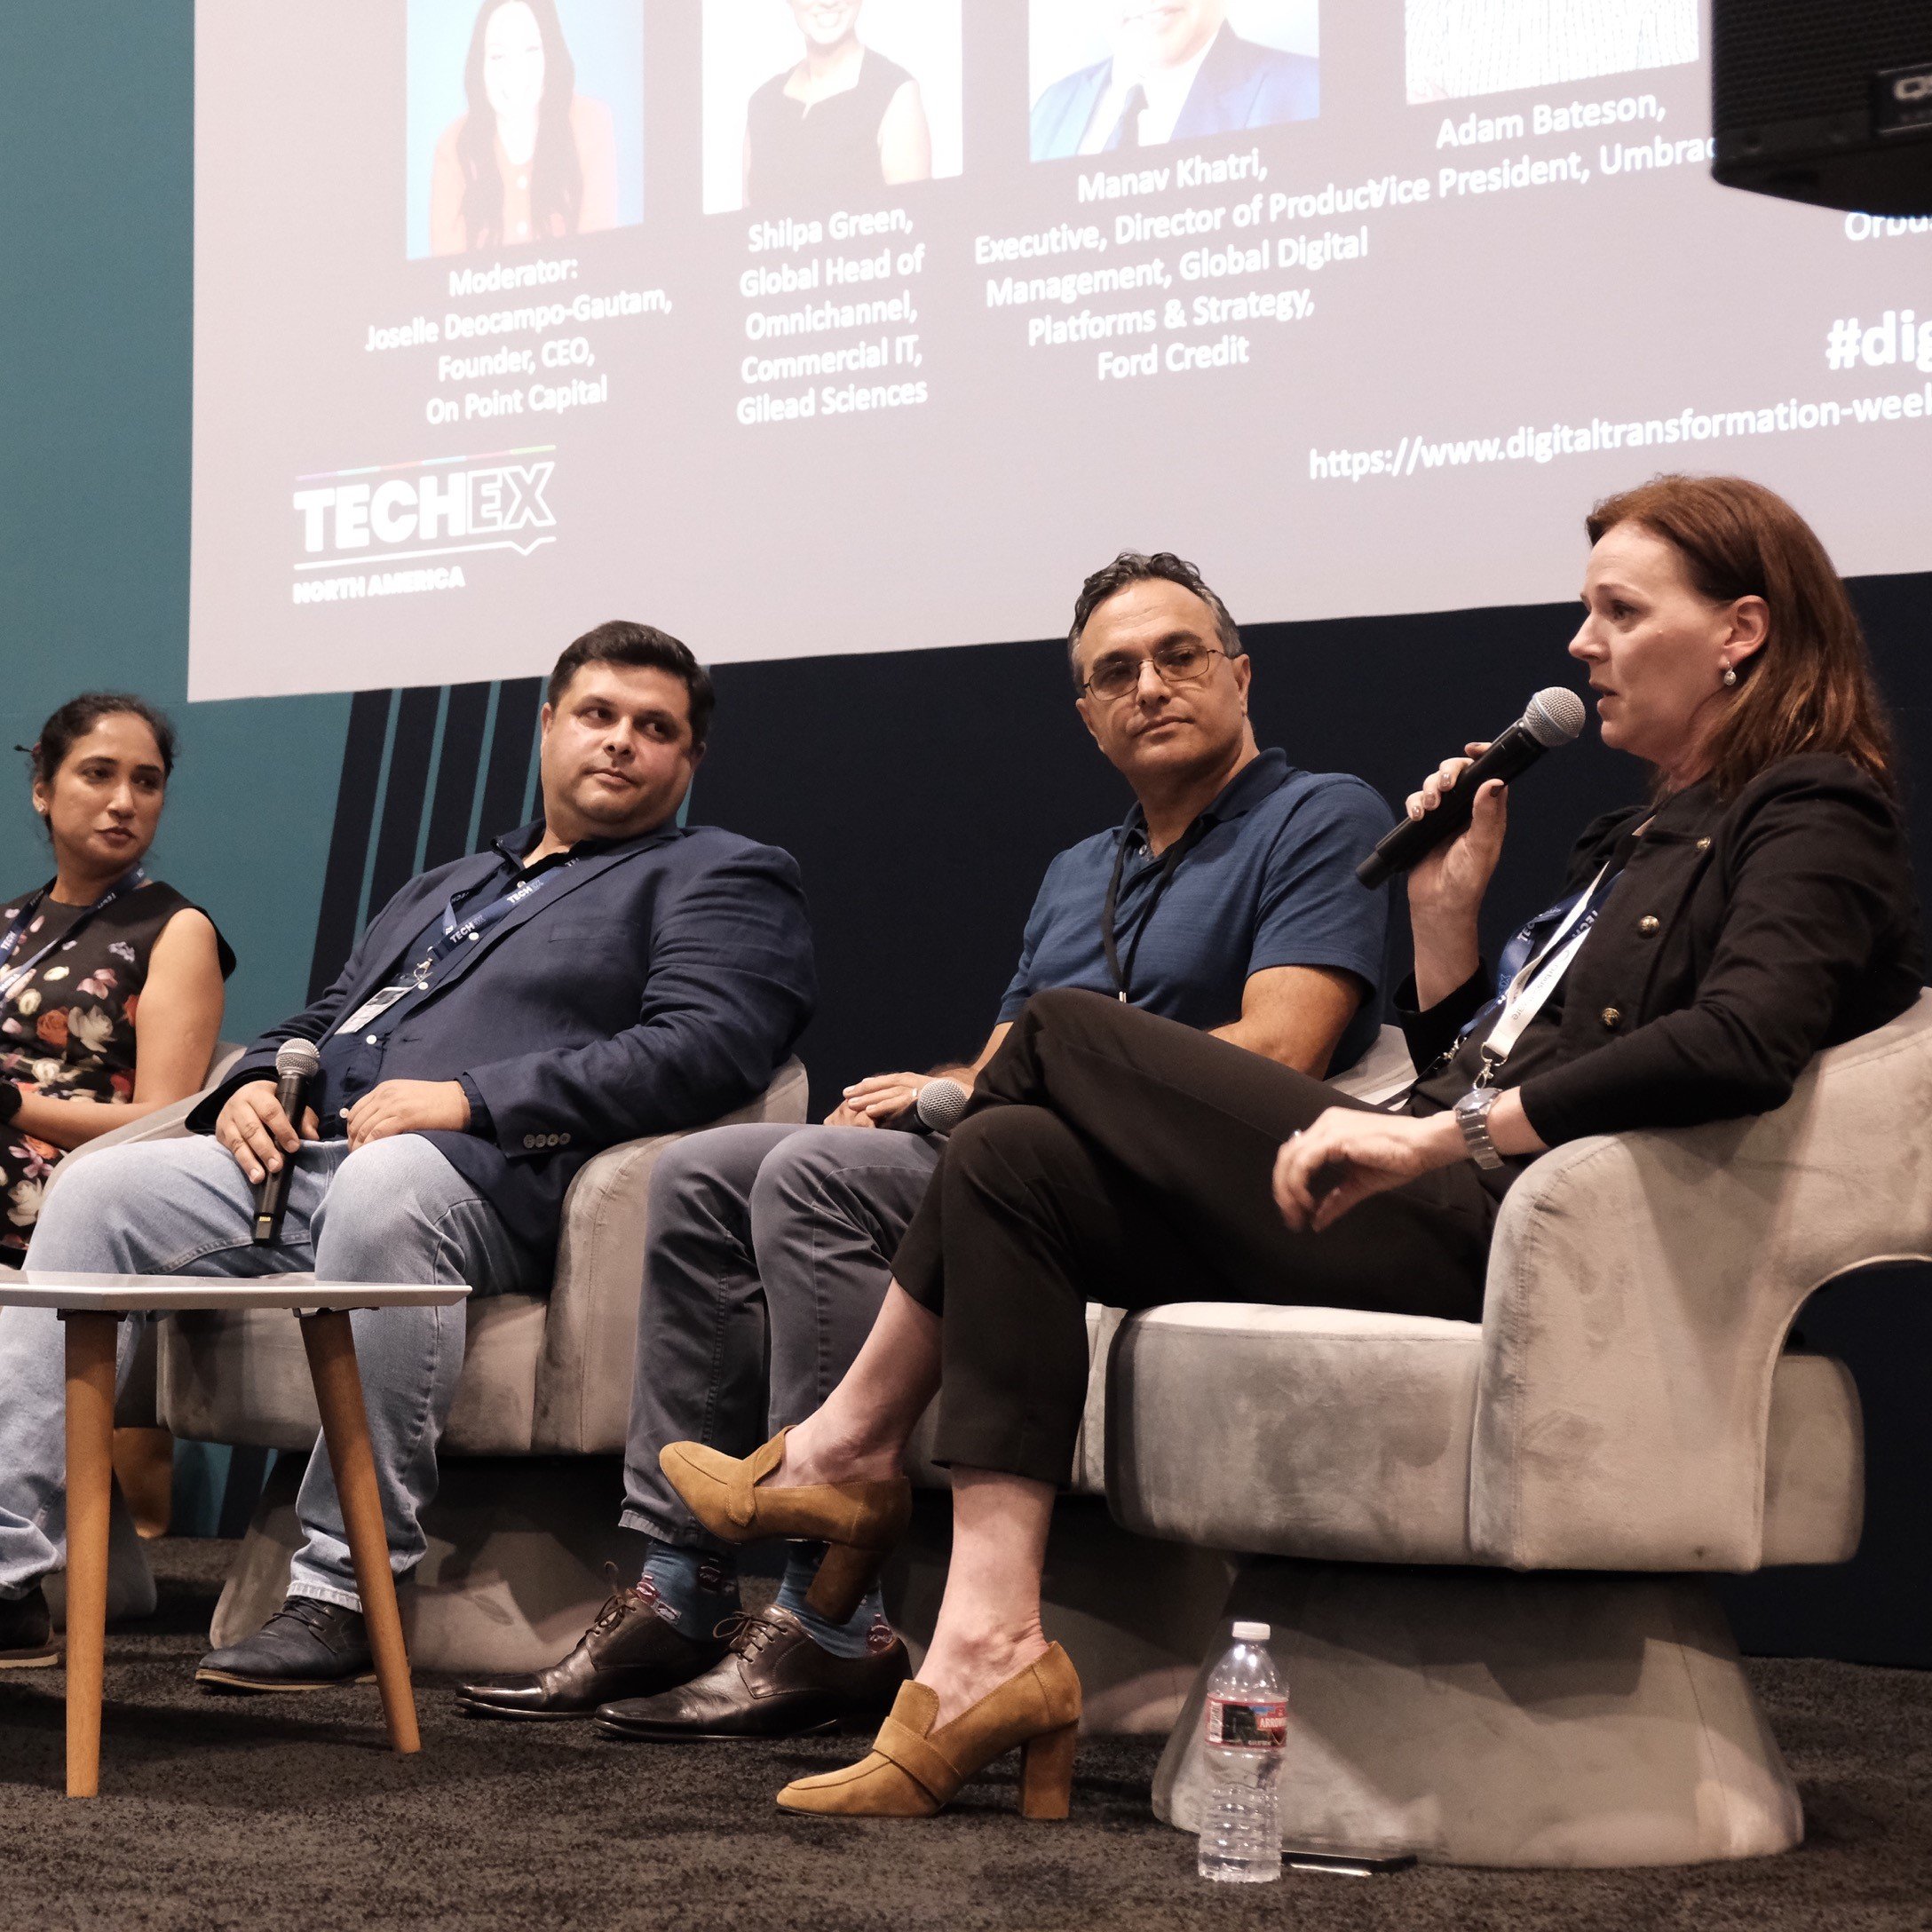 A panel discussion at Digital Transformation Week North America. Five panelists, including Brenda Cowie of Orbus Software, are discussing successful digital transformation roadmaps.